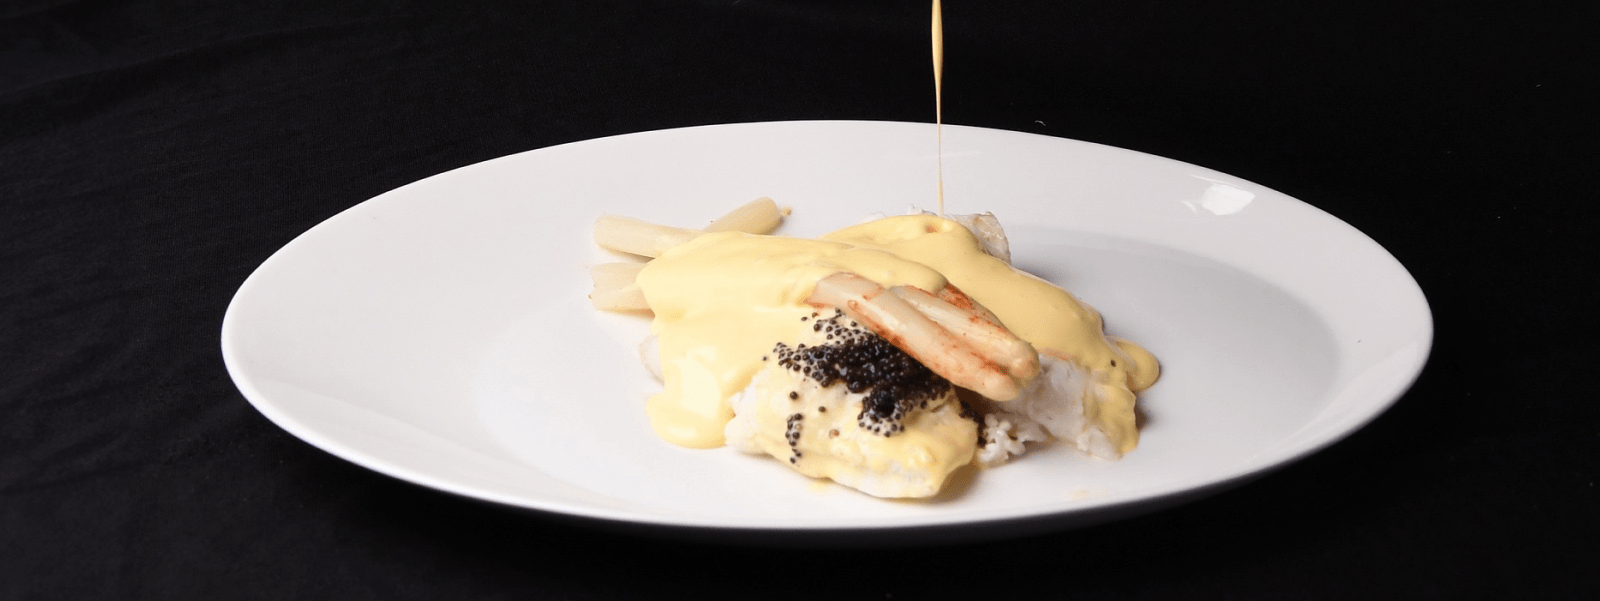 sauce pouring on plate of cod and caviar